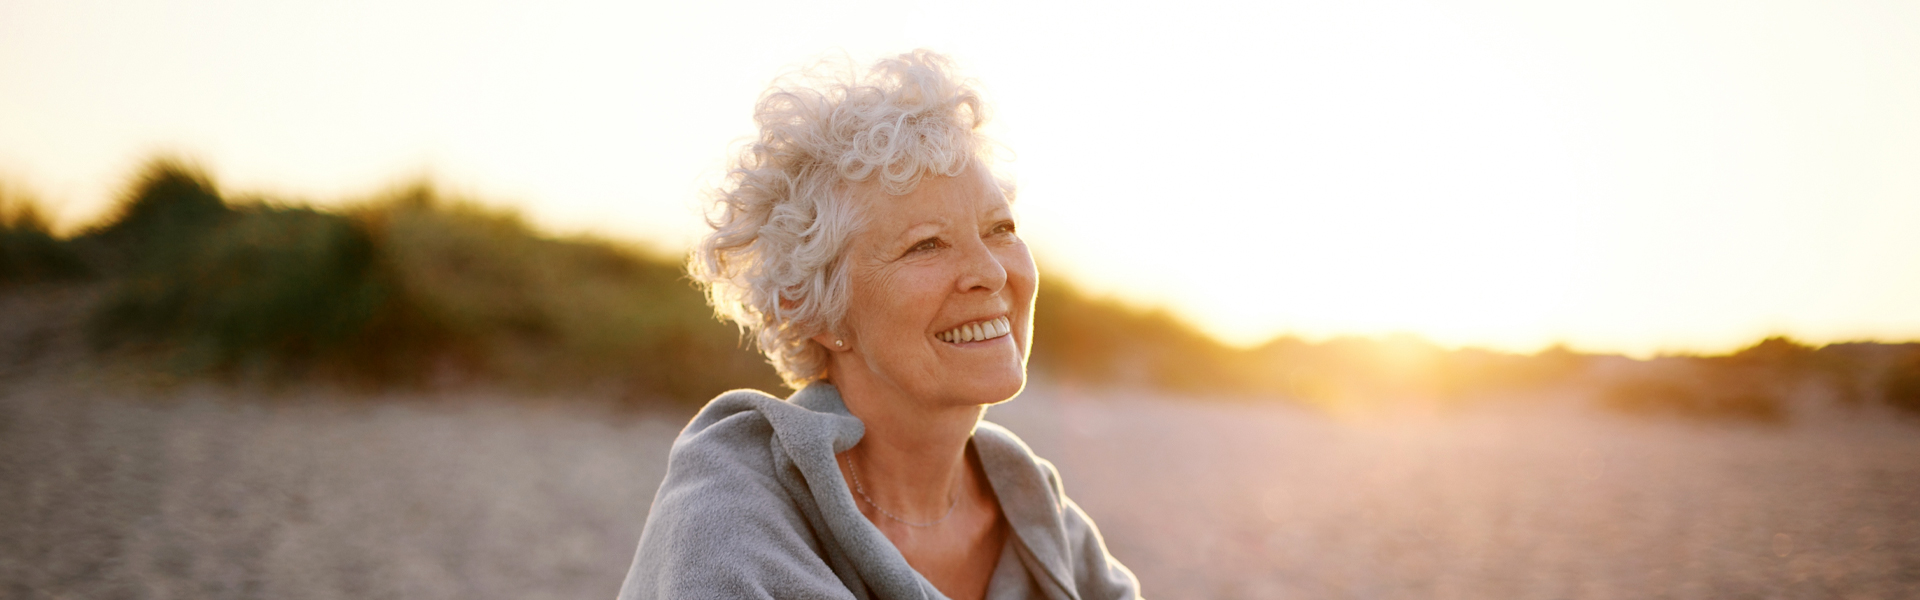 Types of Dentures: What is Best for You?